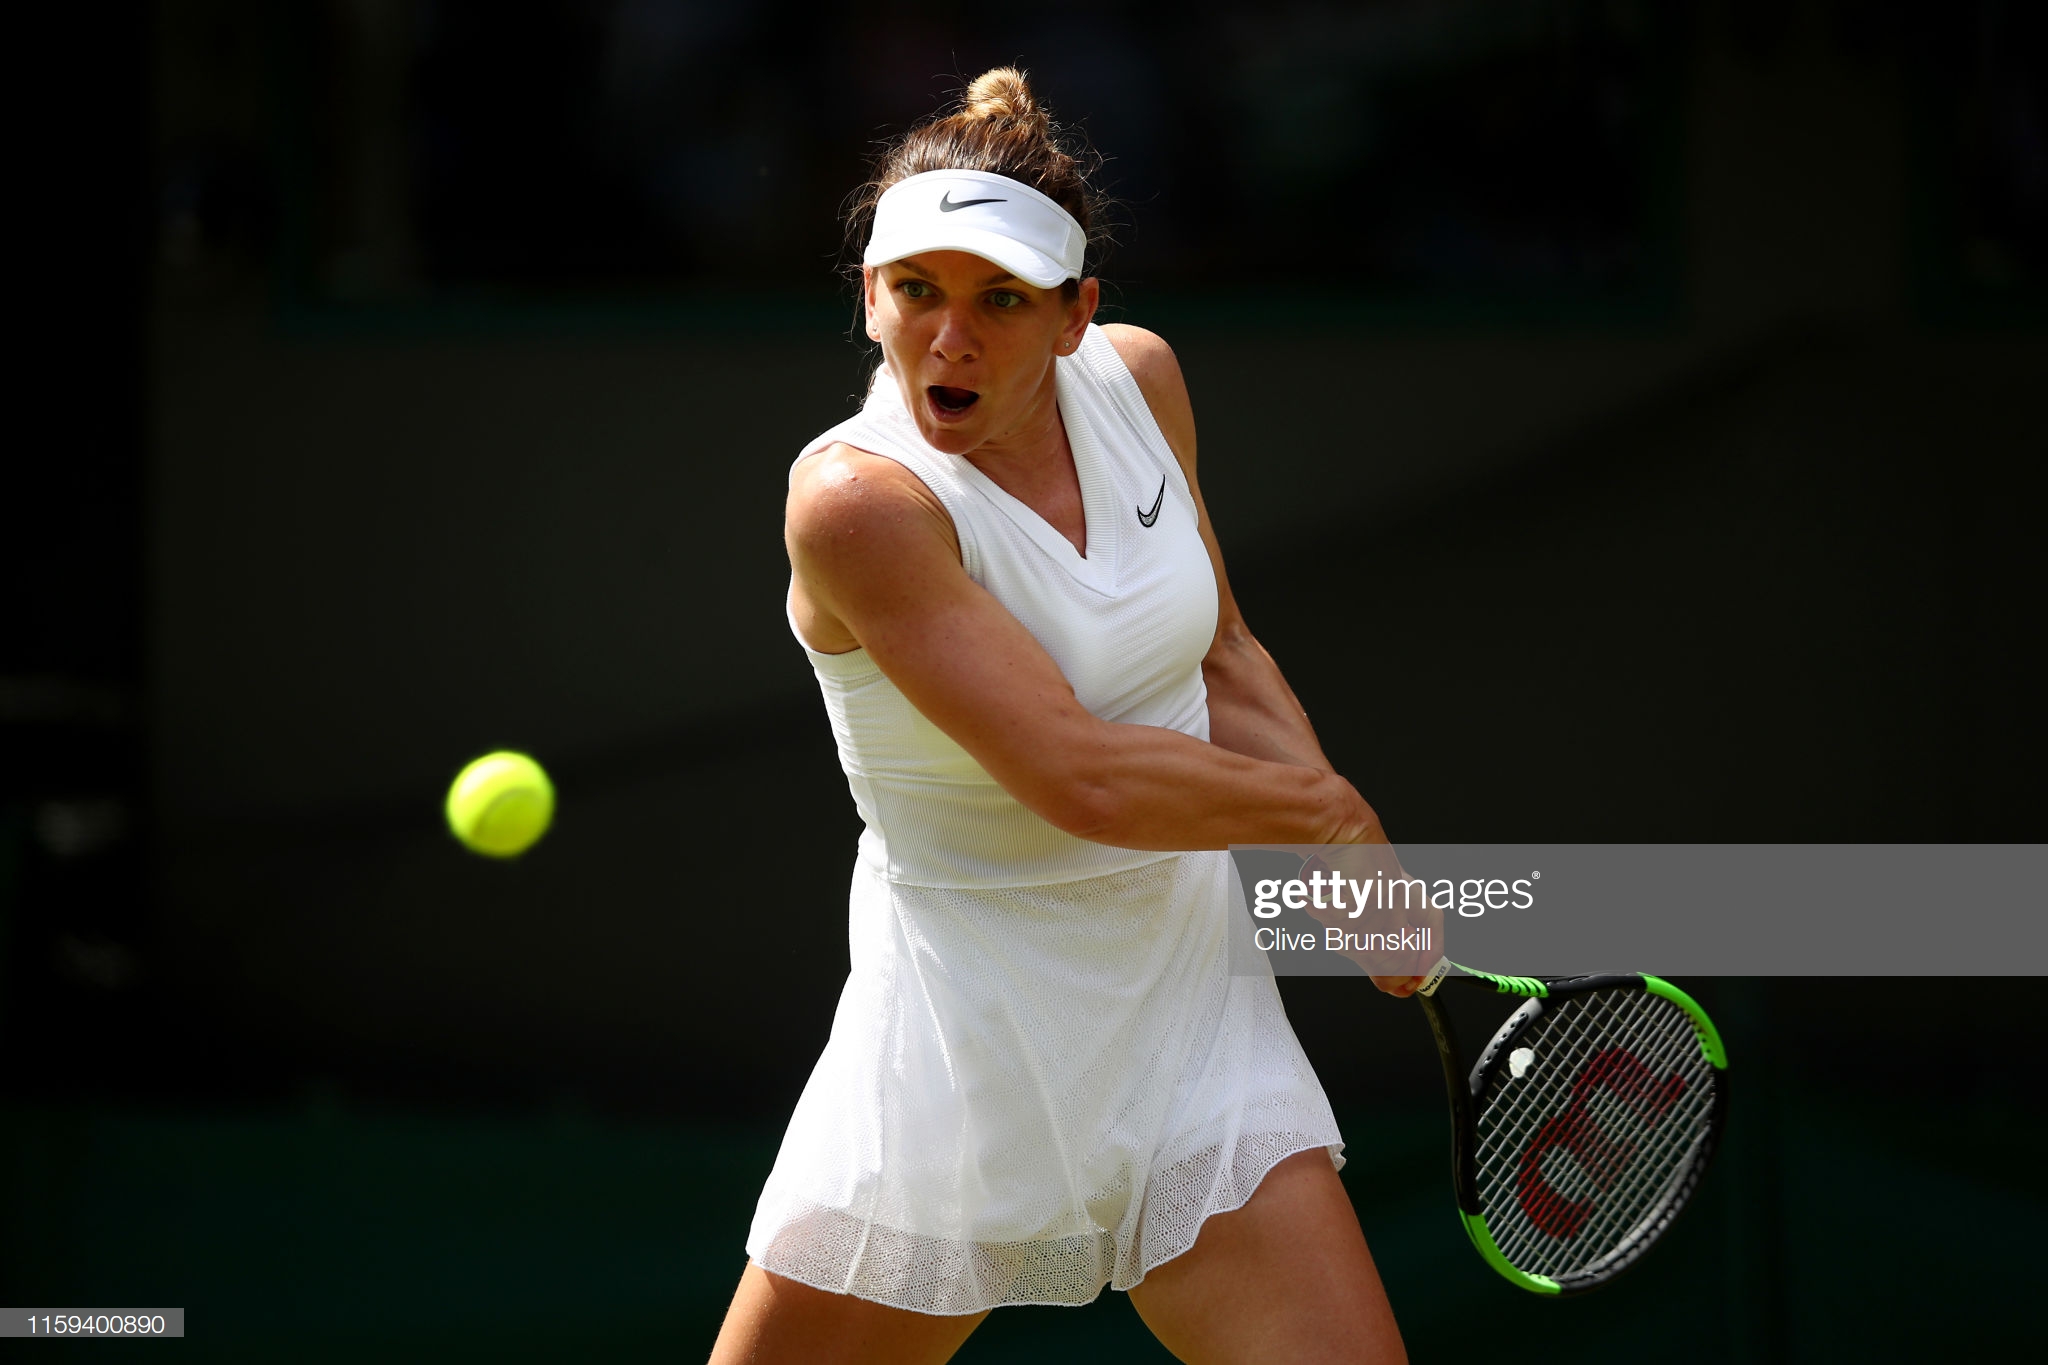 LONDON, ENGLAND - JULY 01: Simona Halep of Romania plays a backhand in her Ladies' Singles first round match against Aliaksandra Sasnovich of Belarus during Day one of The Championships - Wimbledon 2019 at All England Lawn Tennis and Croquet Club on July 01, 2019 in London, England. (Photo by Clive Brunskill/Getty Images)